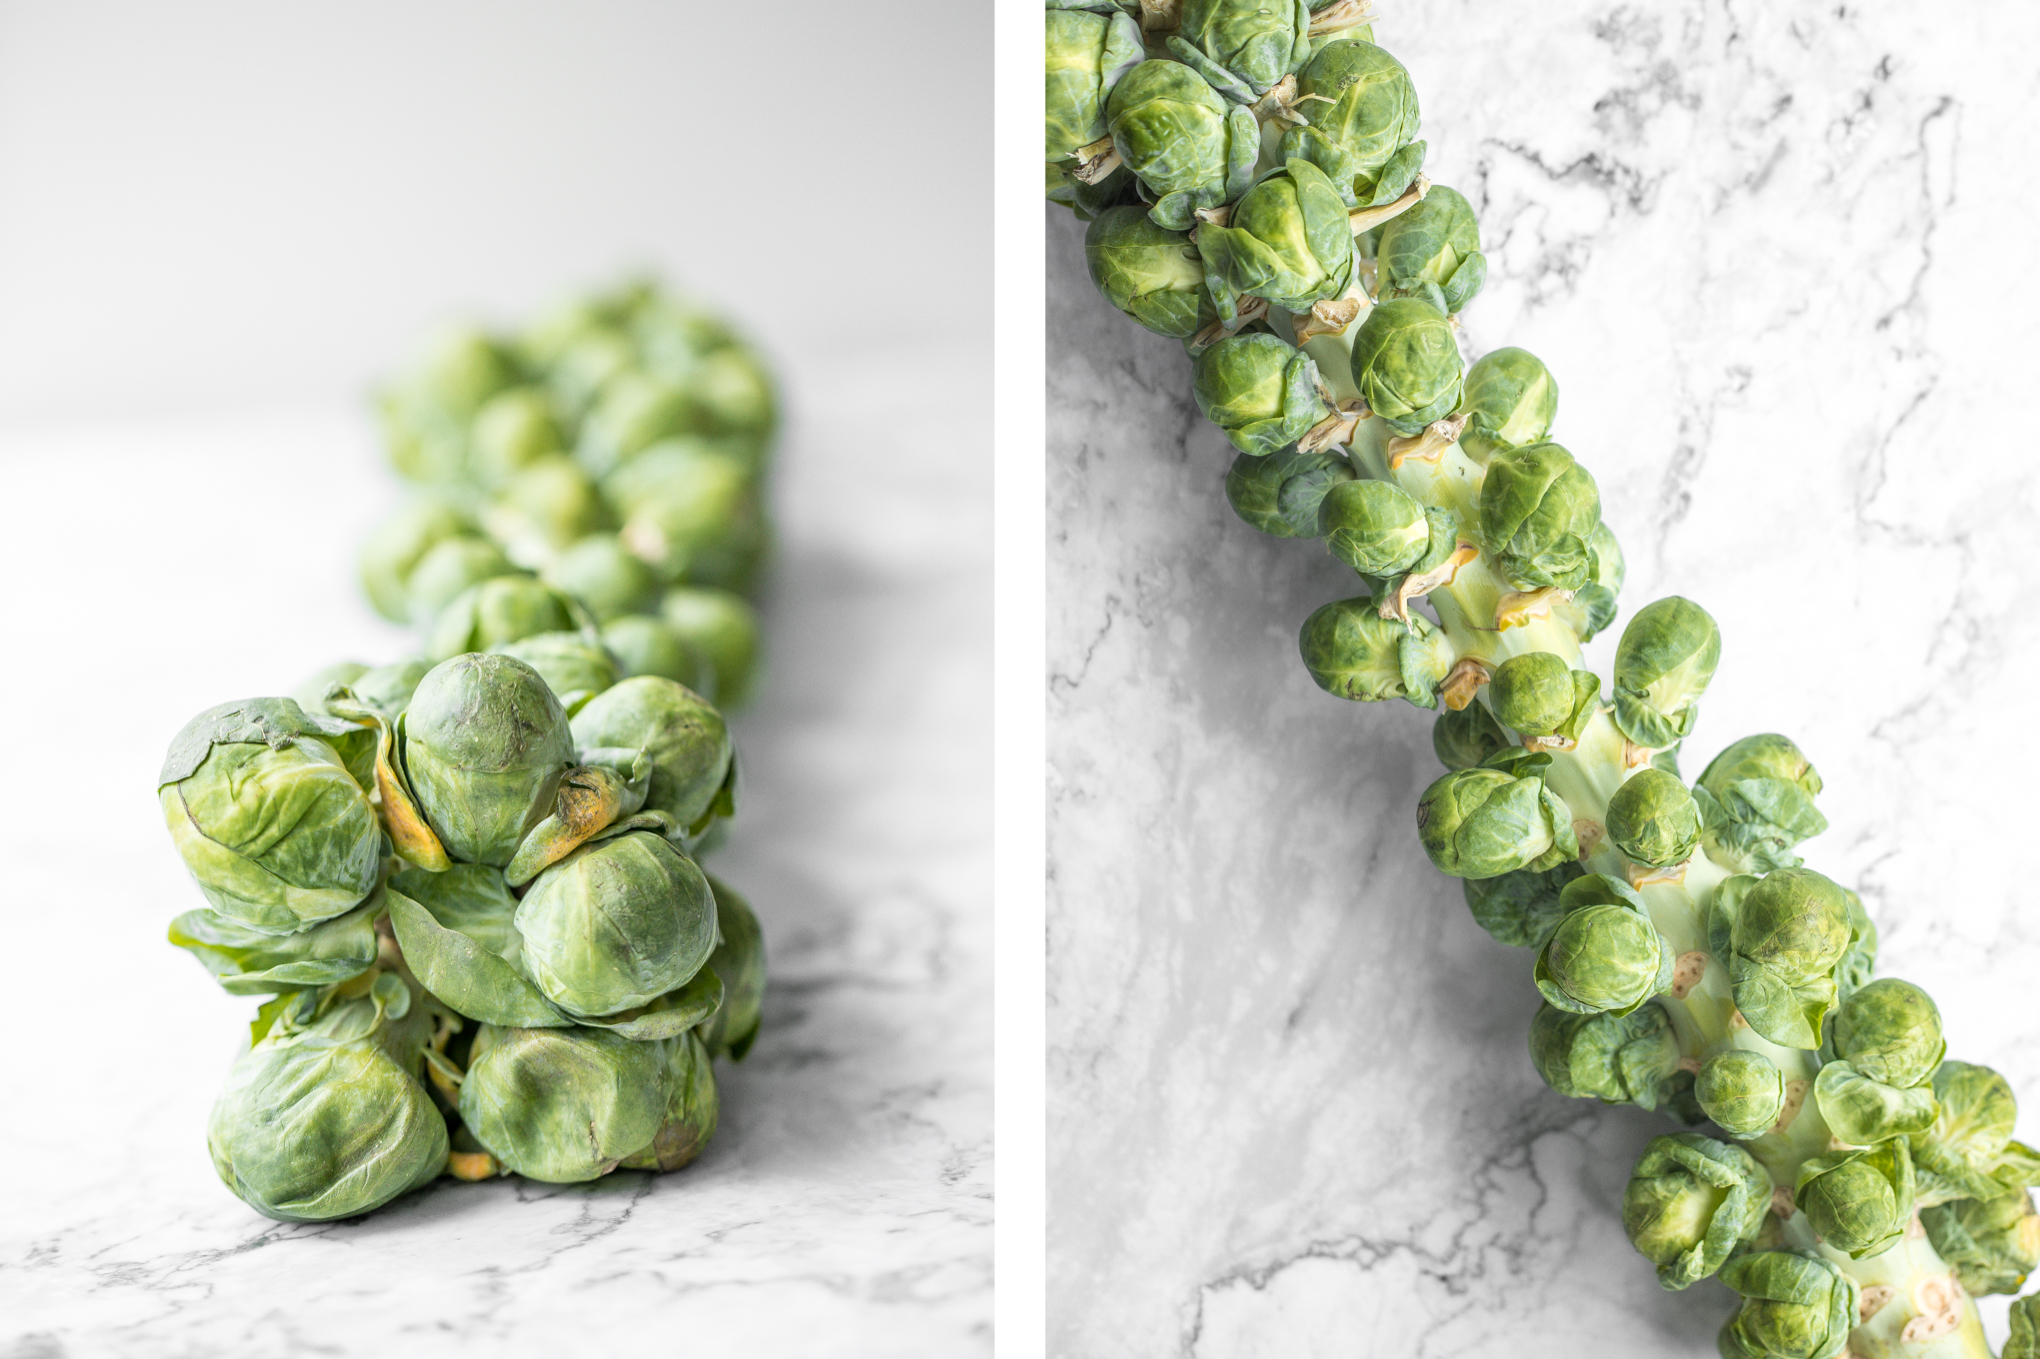 Tender and crispy roasted air fryer brussels sprouts cooks in less than 12 minutes with very little oil. It is a holiday table game changer. | aheadofthyme.com